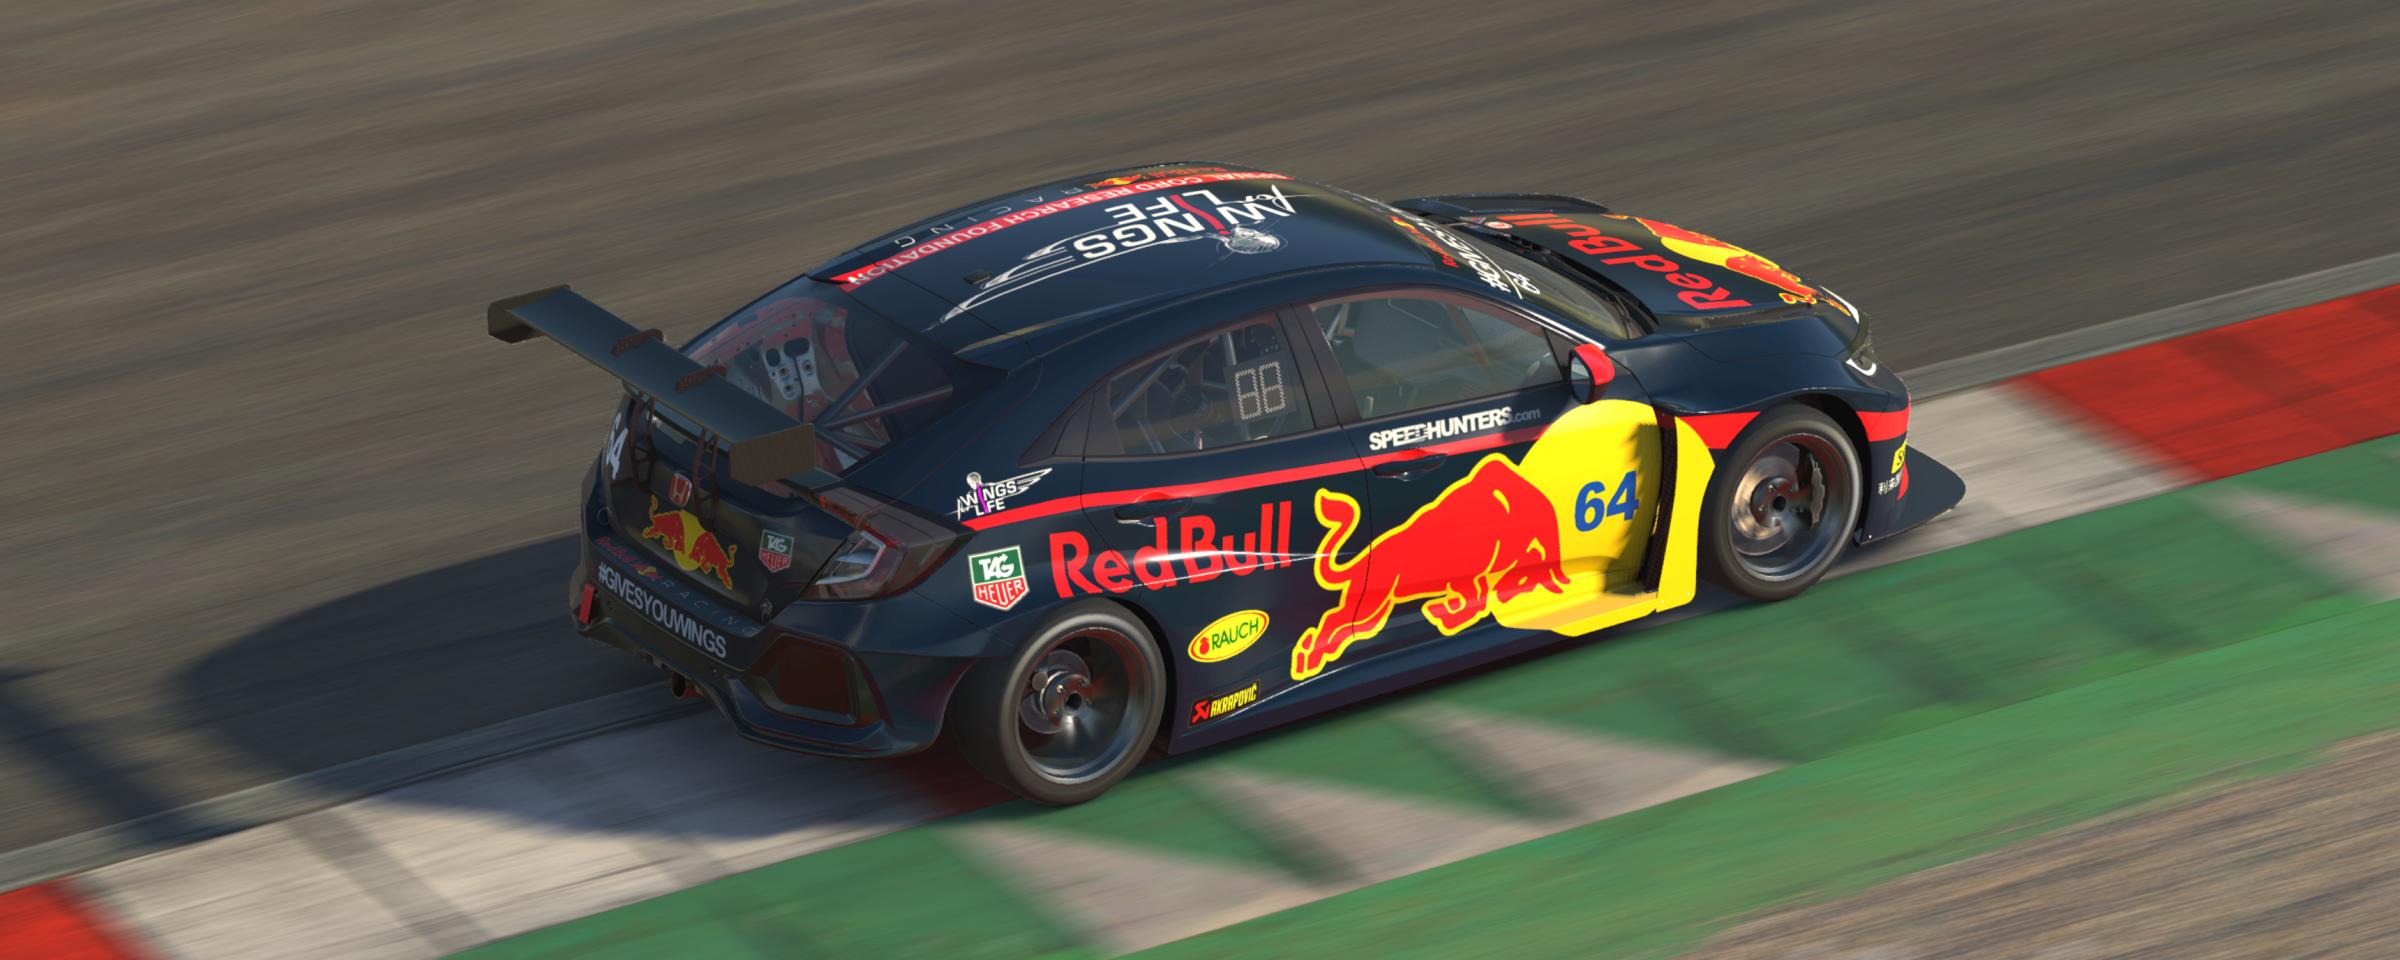 Preview of Red Bull Honda Civic by Stefan Gawlista